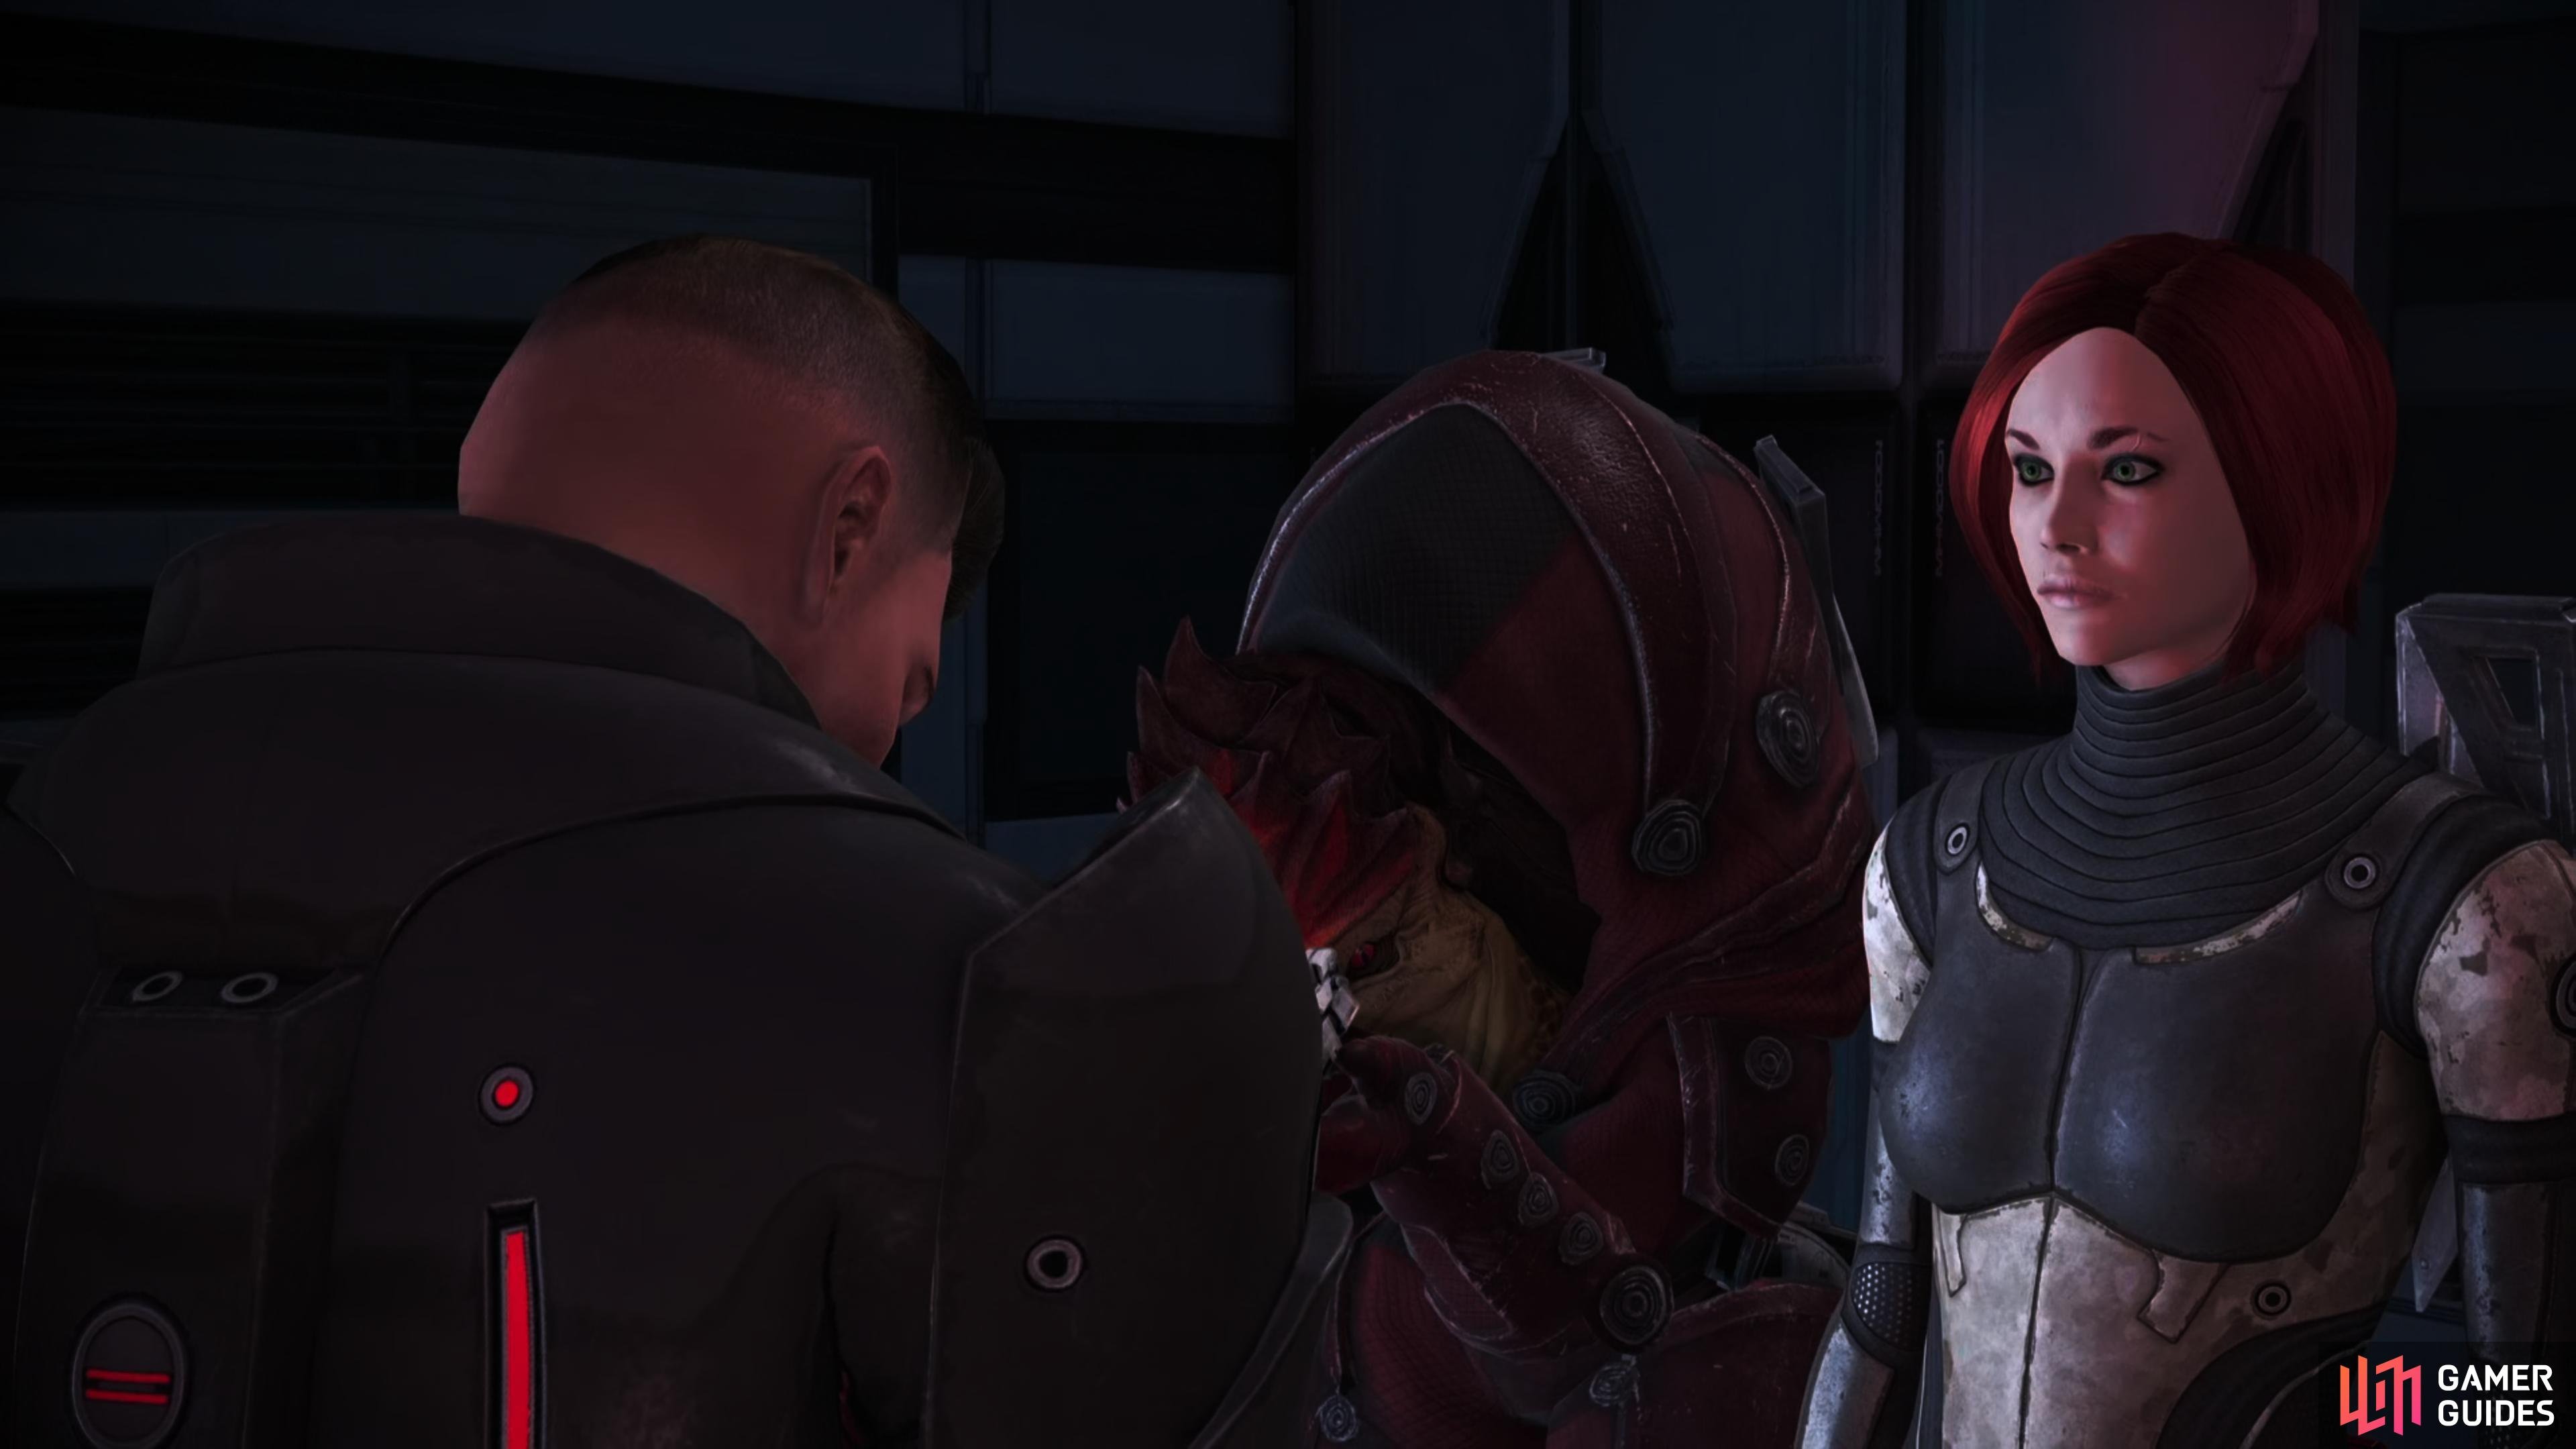 …unless you brought Wrex along, who makes good on his threats.